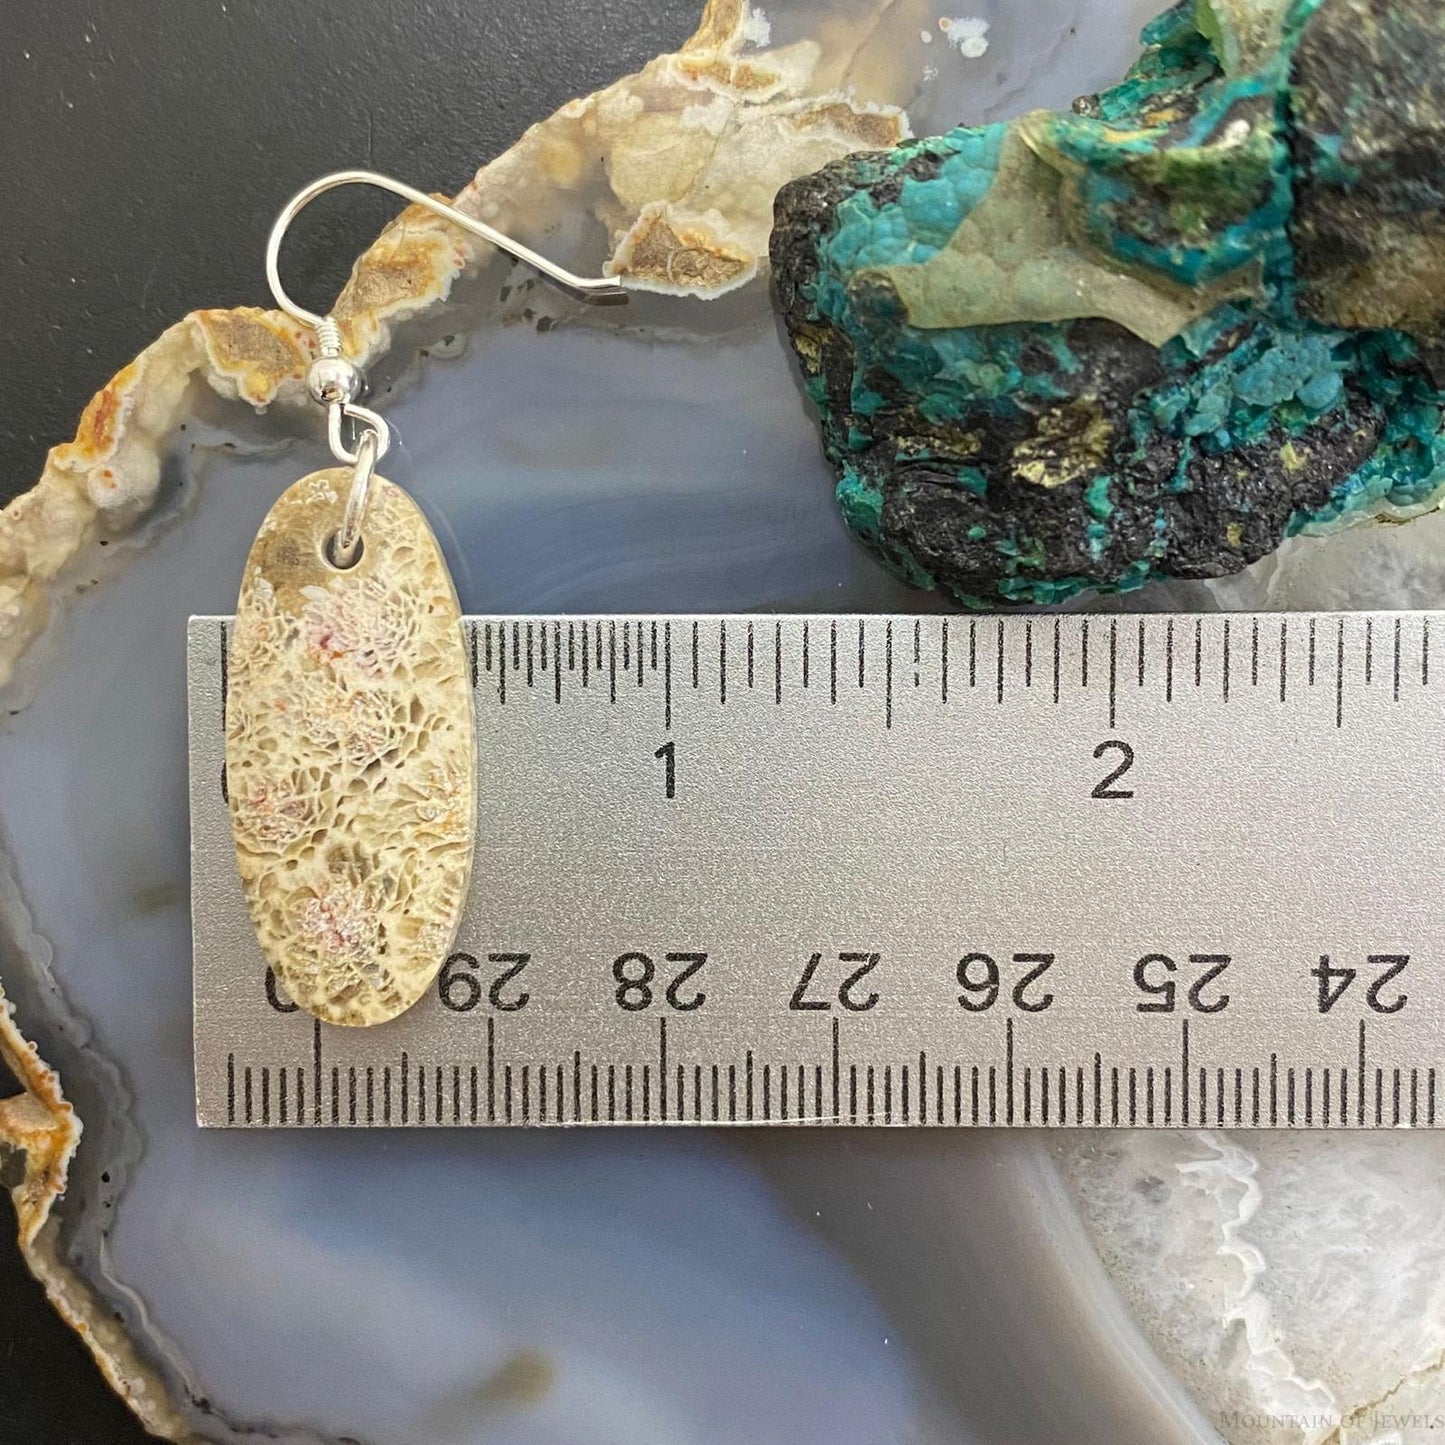 Sterling Silver Oval Fossilized Coral Slab Dangle Earrings For Women #070